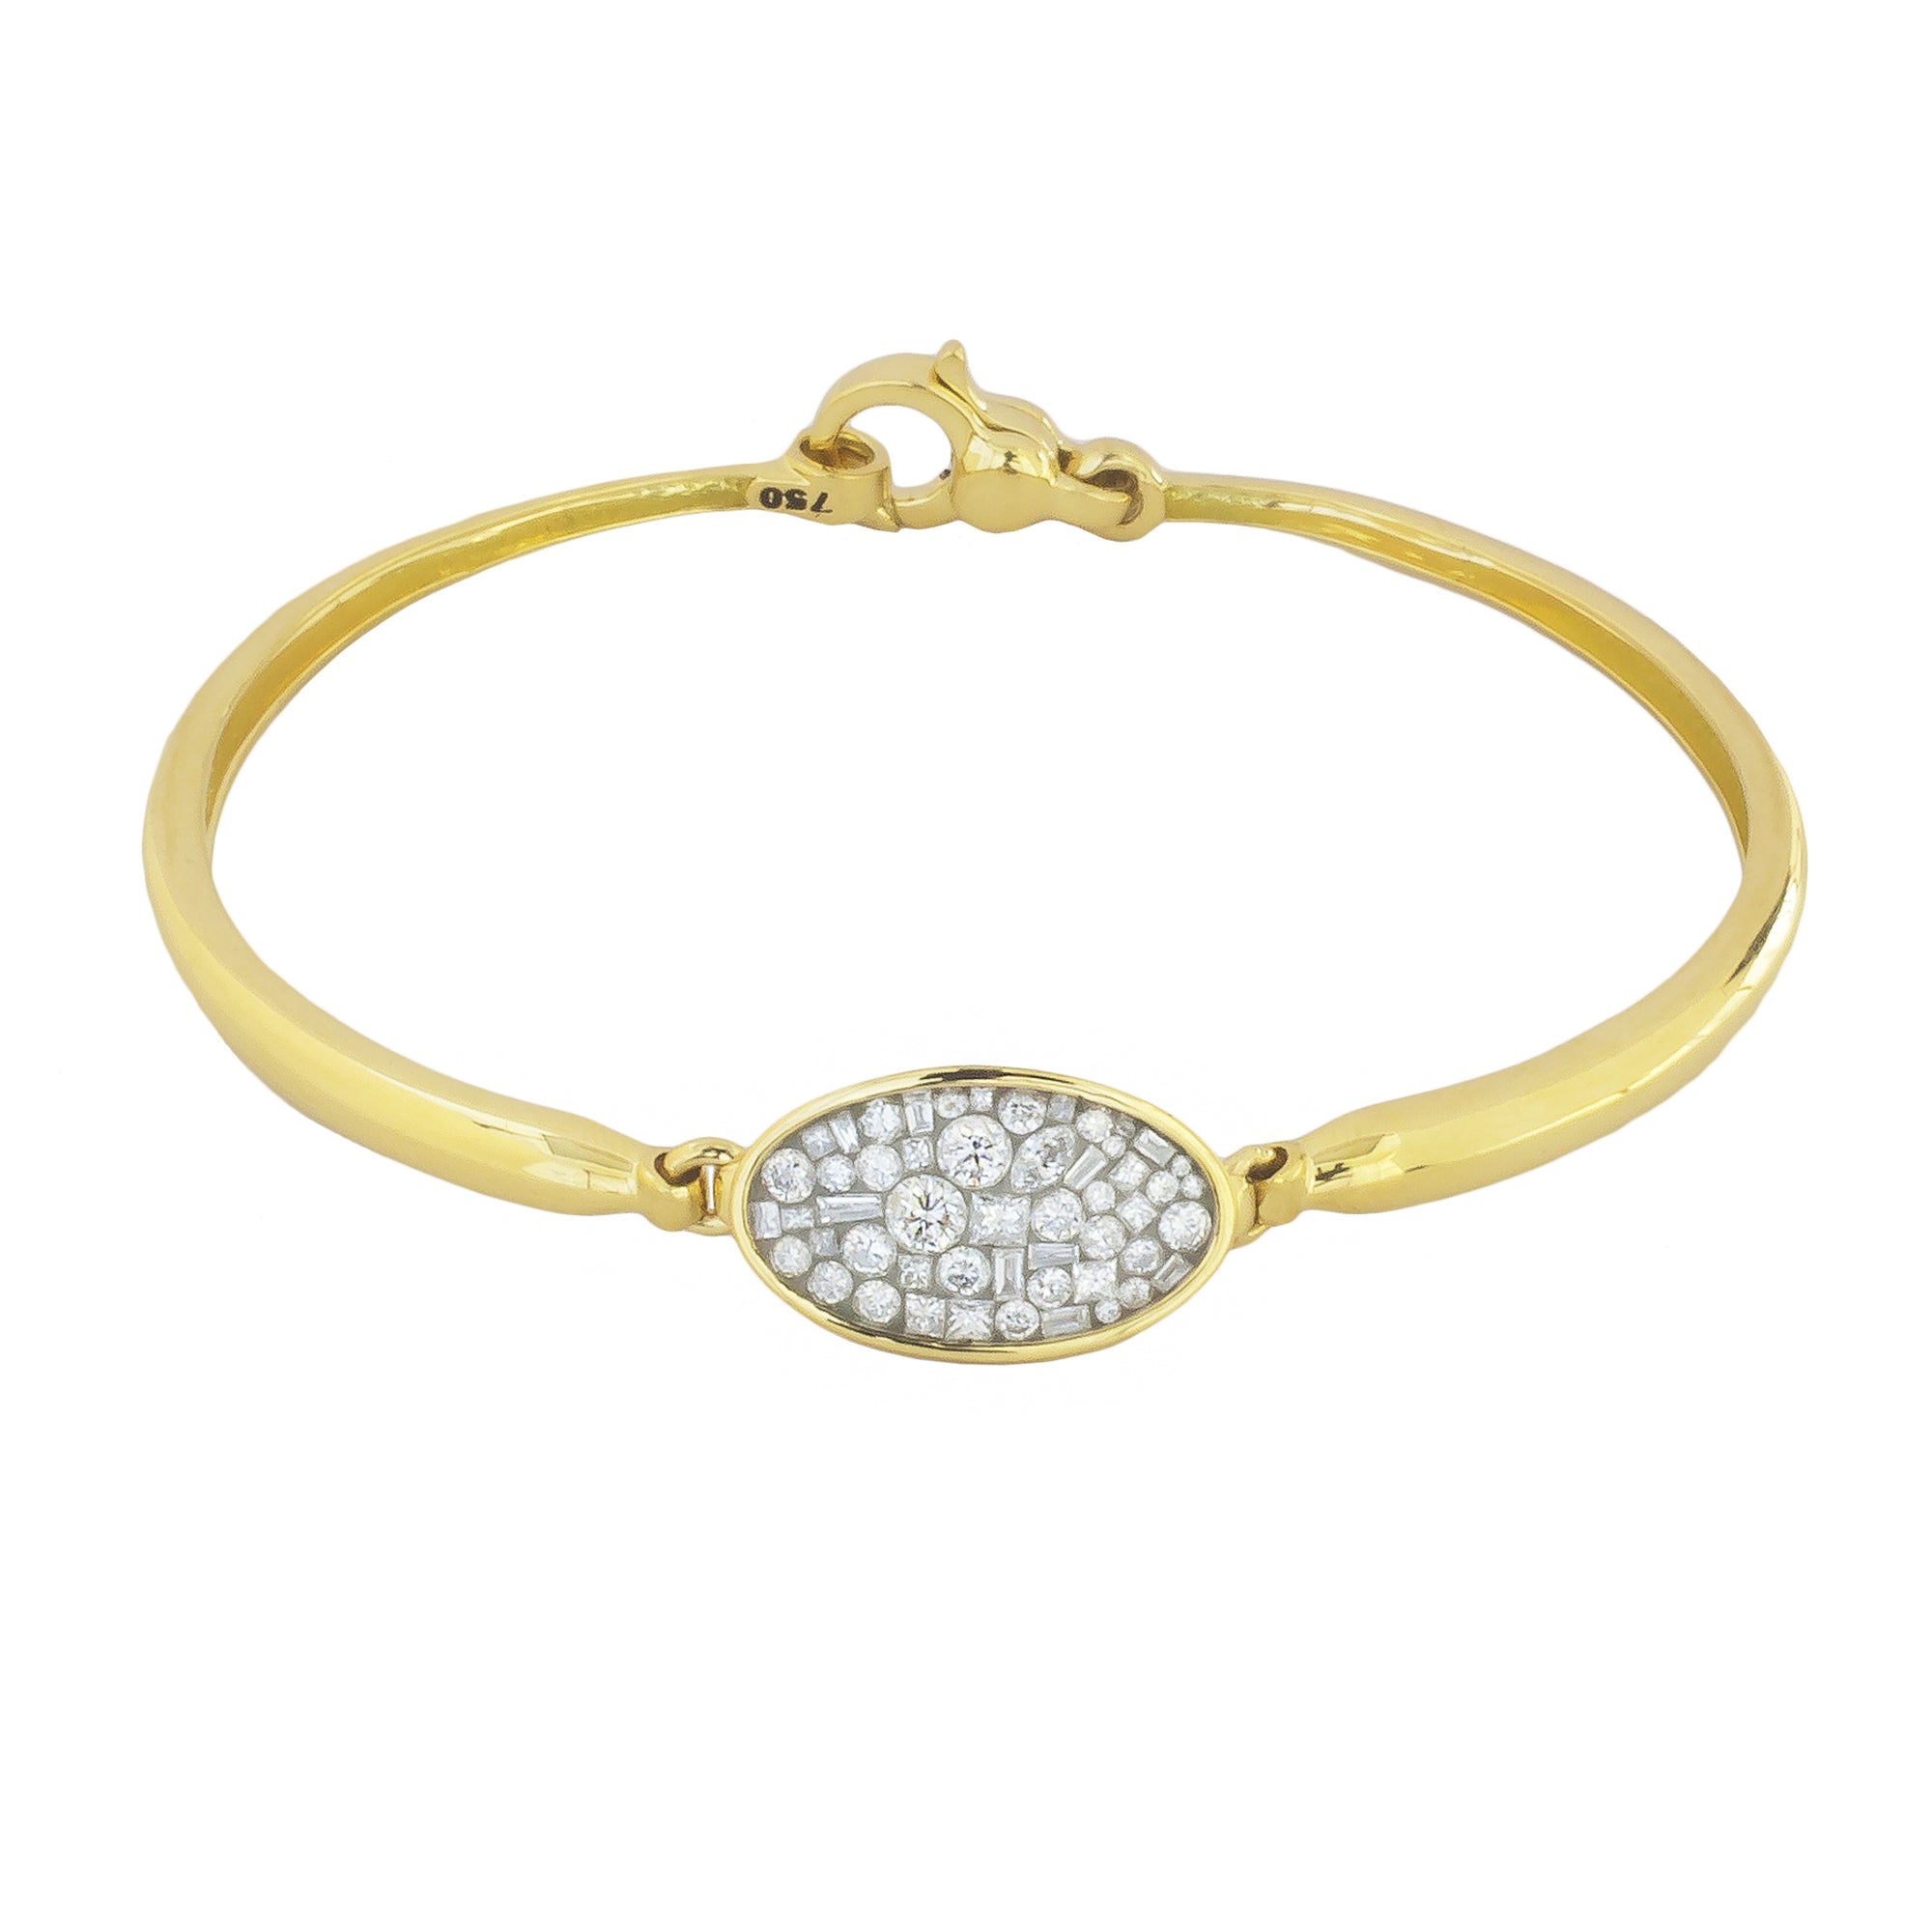 Ice Pod Diamond Bracelet by Pleve available at Talisman Collection Fine Jewelers in El Dorado Hills, CA and online. Specs: .75 cttw white diamonds, 18k yellow gold.